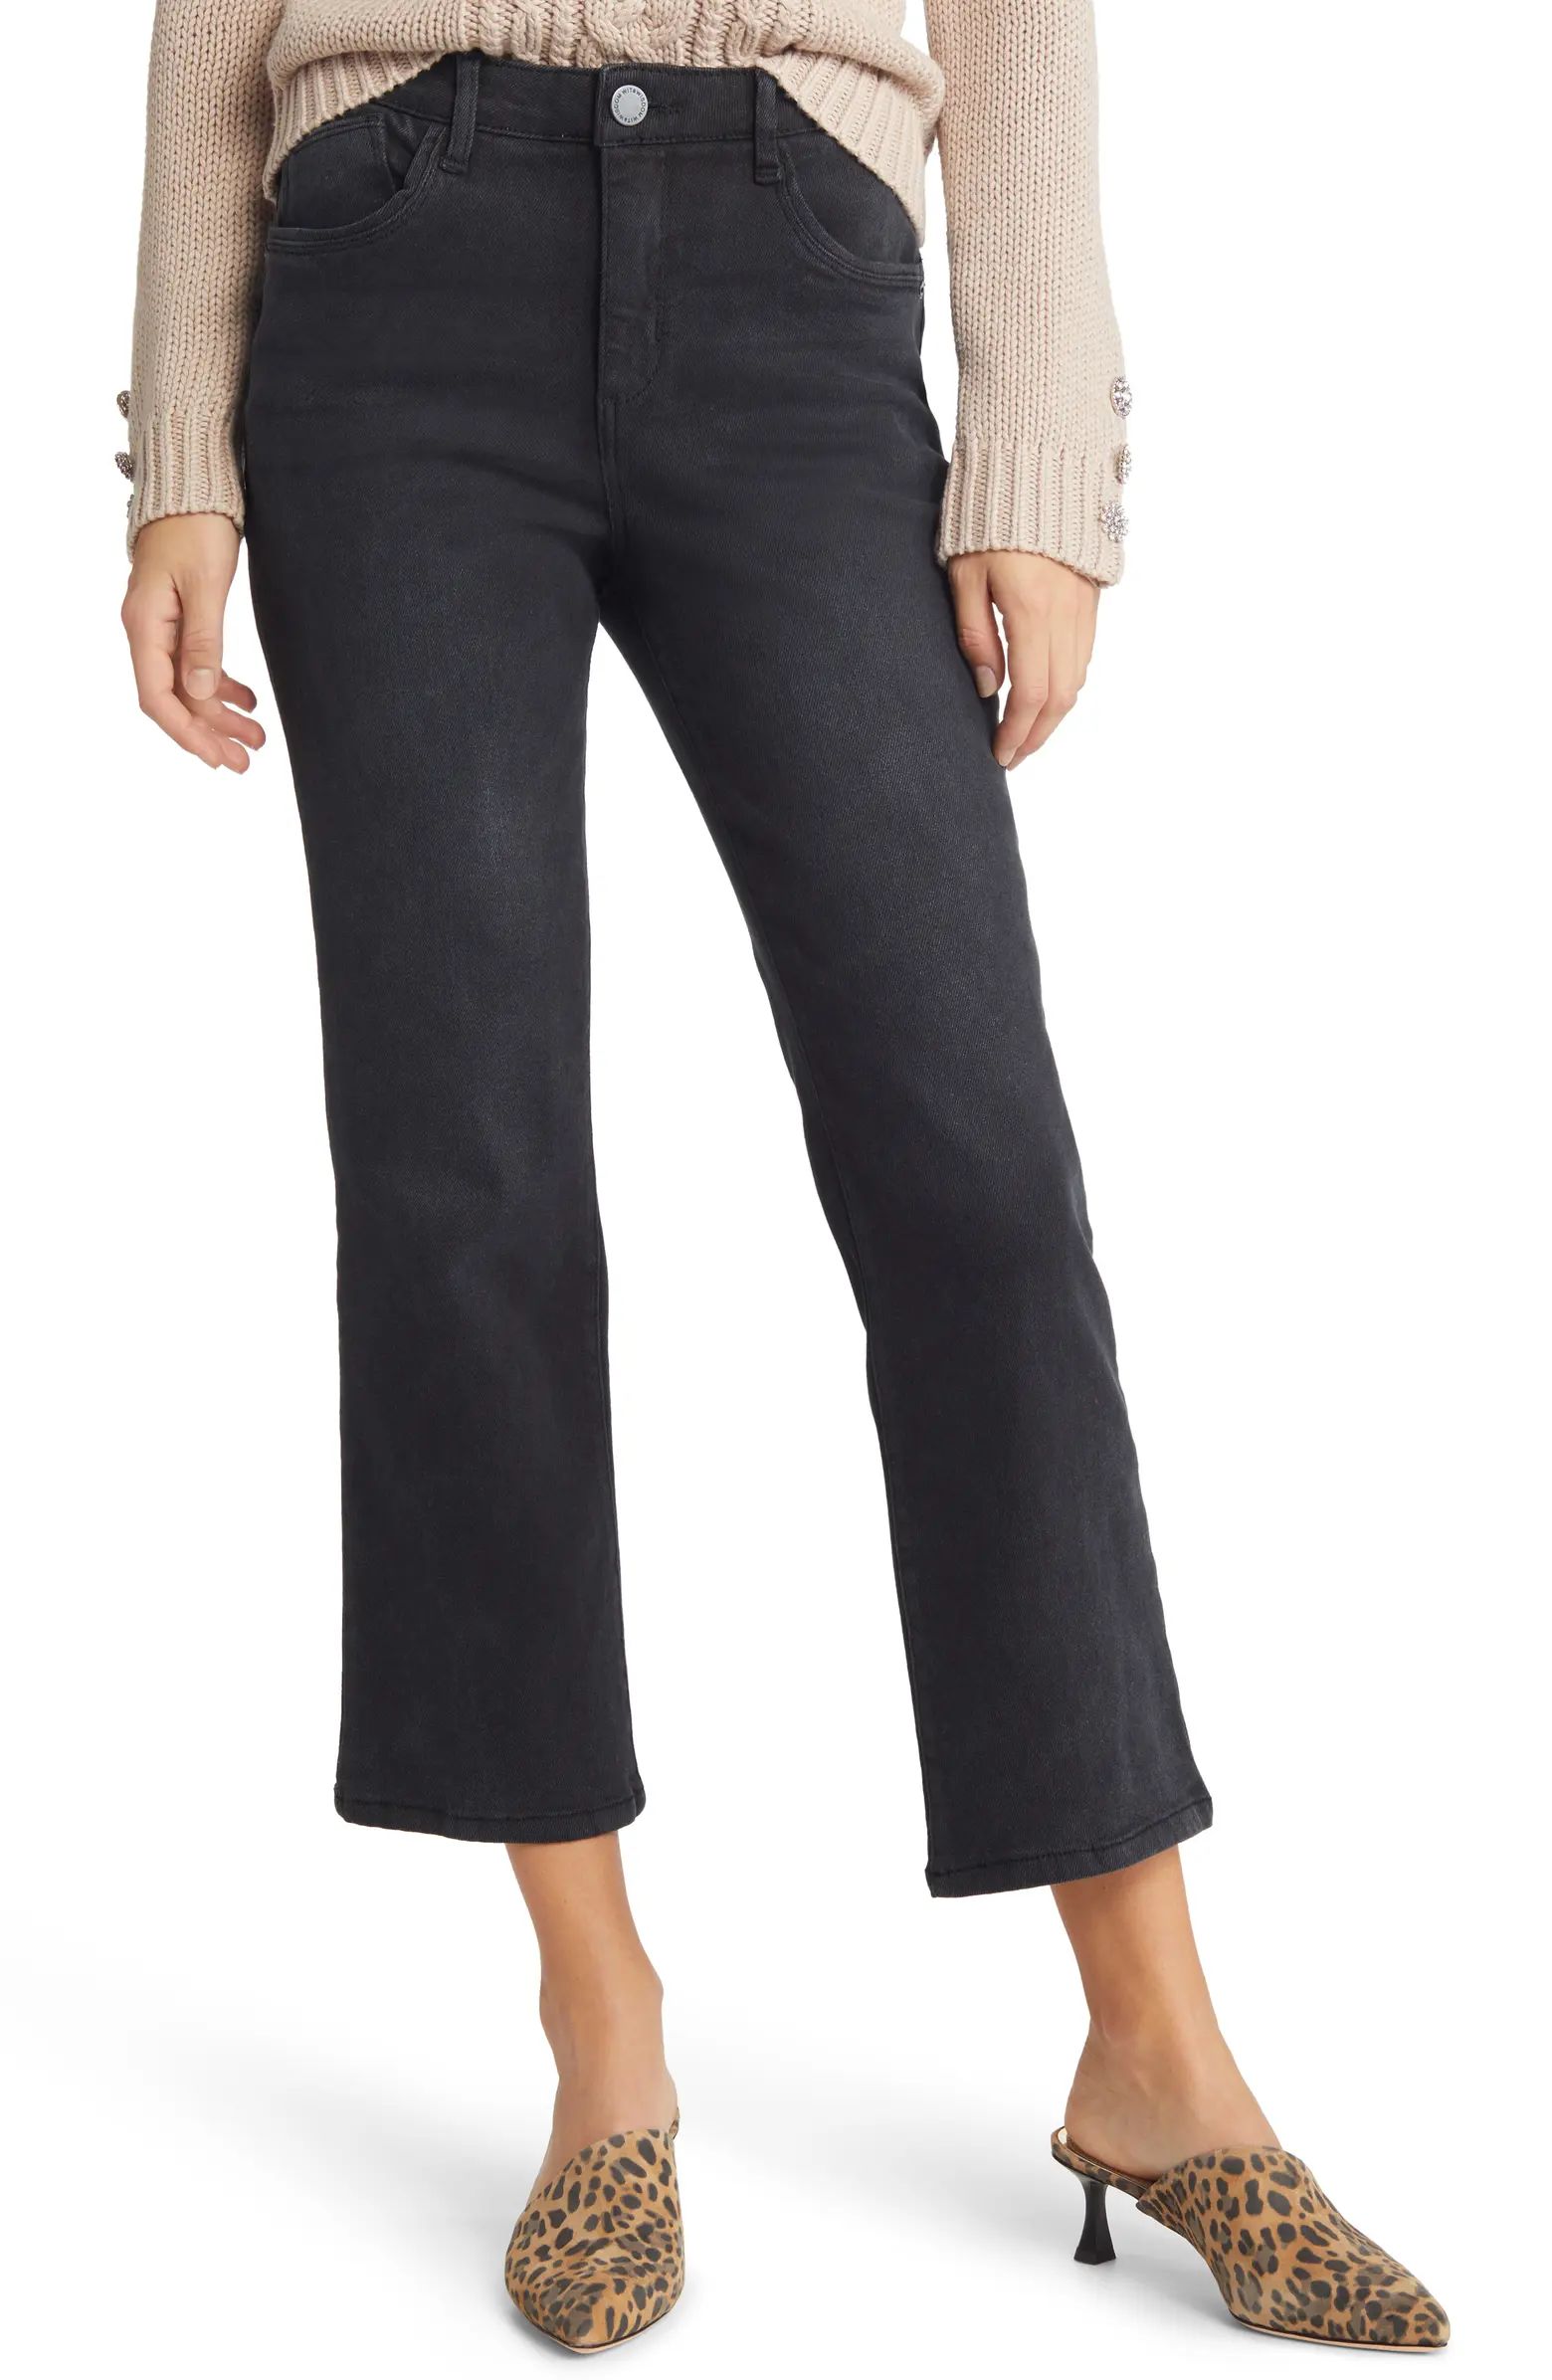 Wit & Wisdom AbSolution High Waist Ankle Bootcut Jeans | Nordstrom | Nordstrom